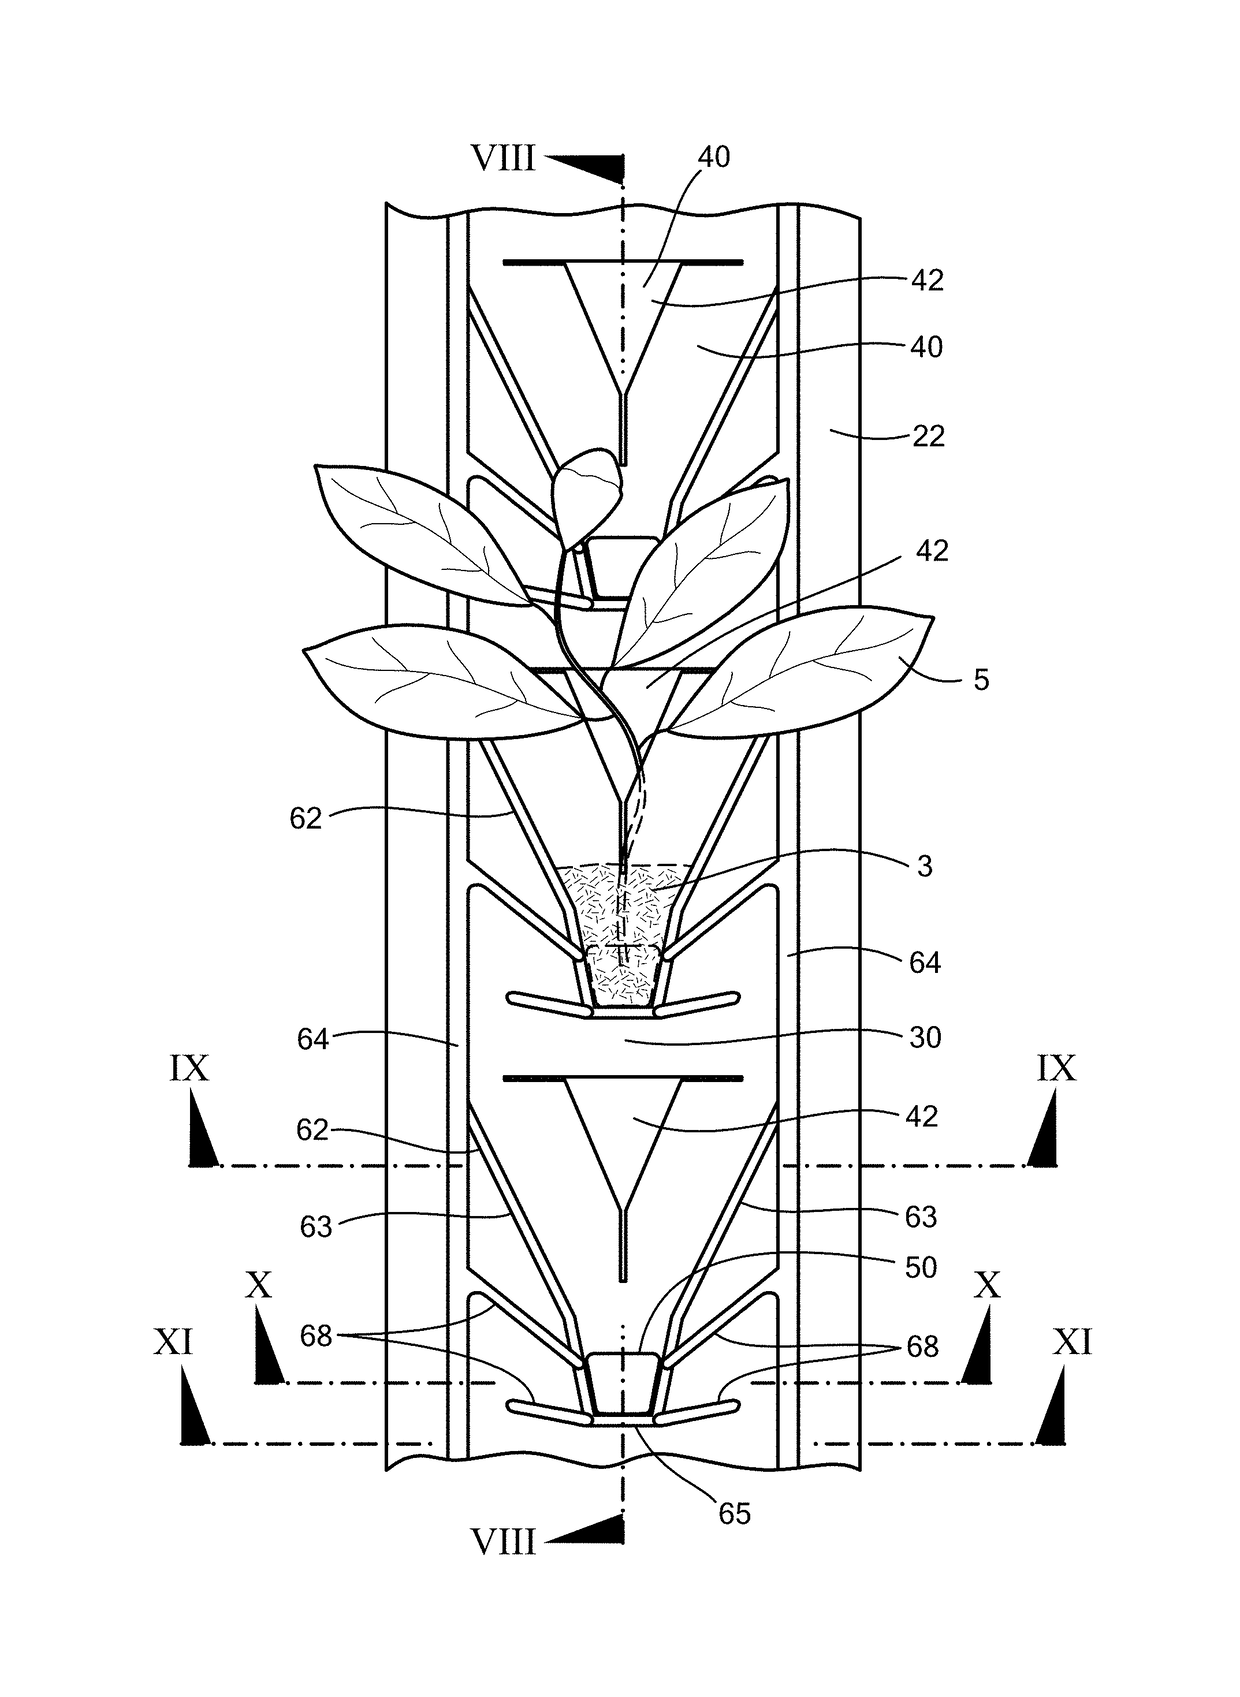 Vertical Assembly for Growing Plants